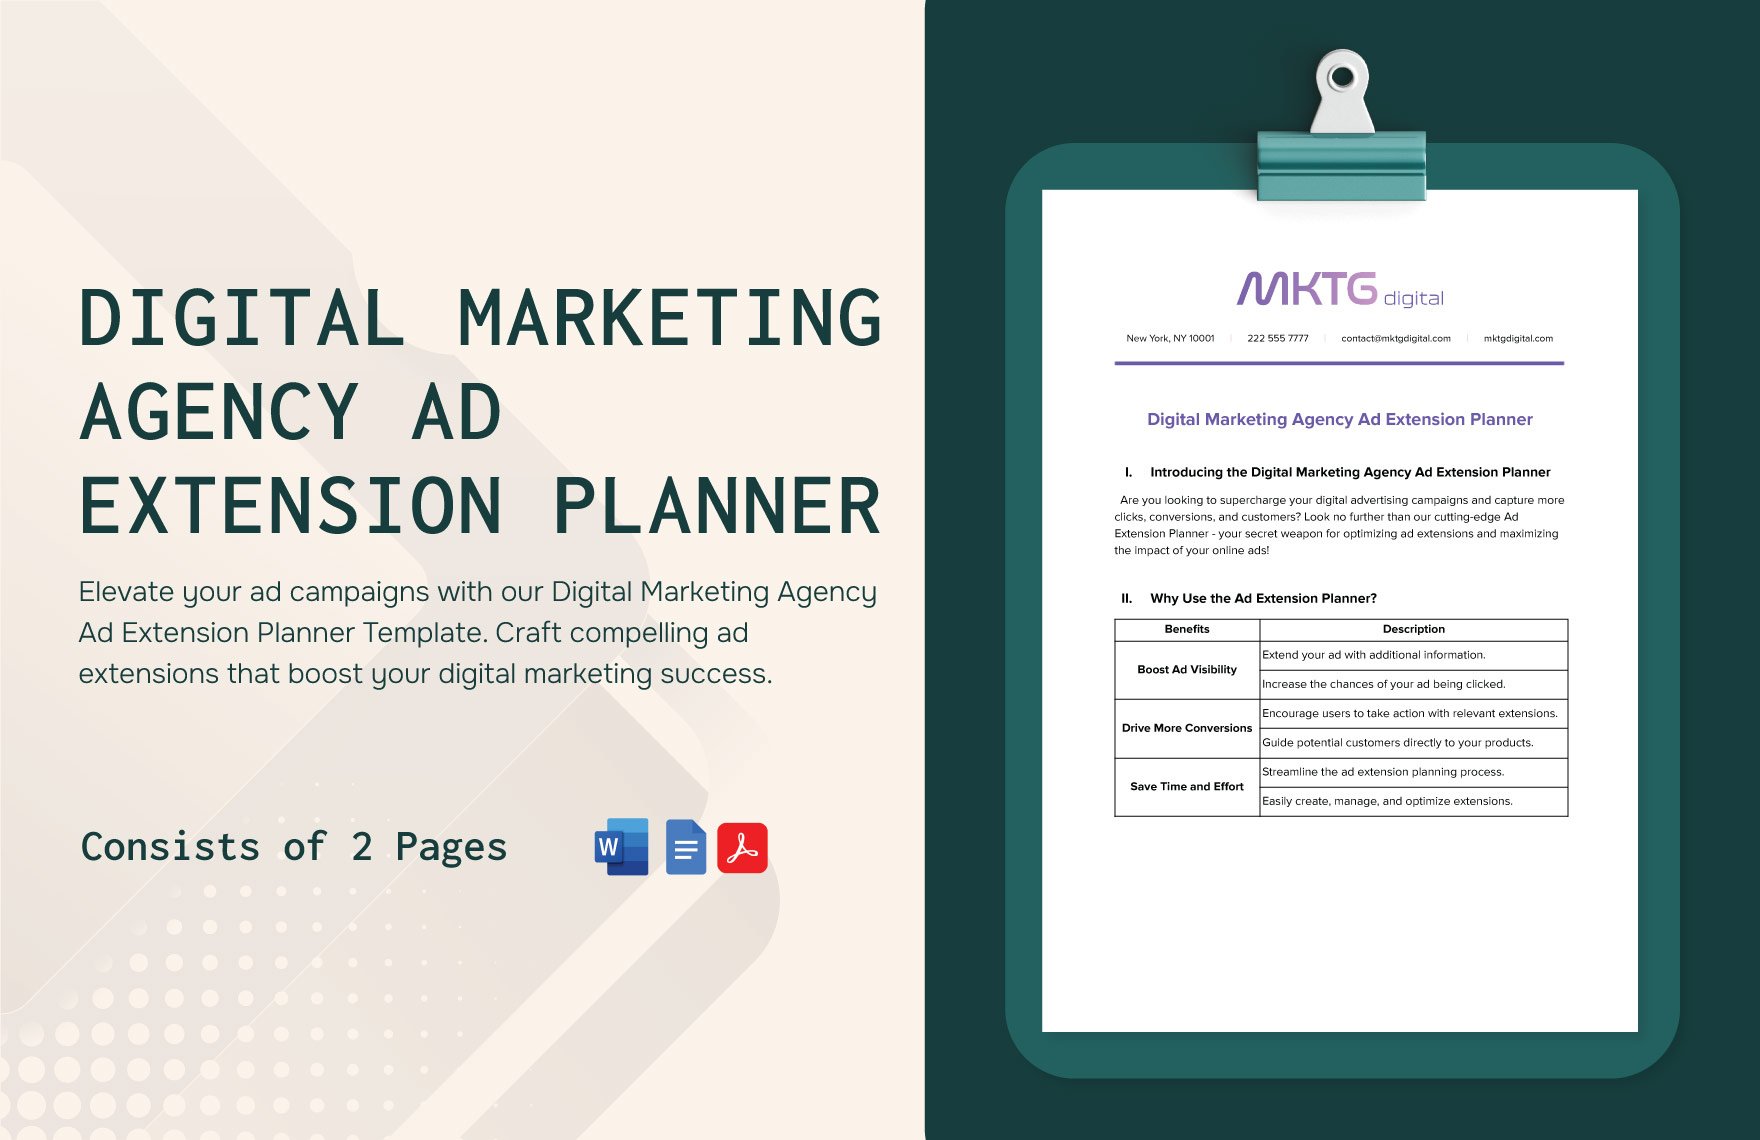 Digital Marketing Agency Ad Extension Planner Template